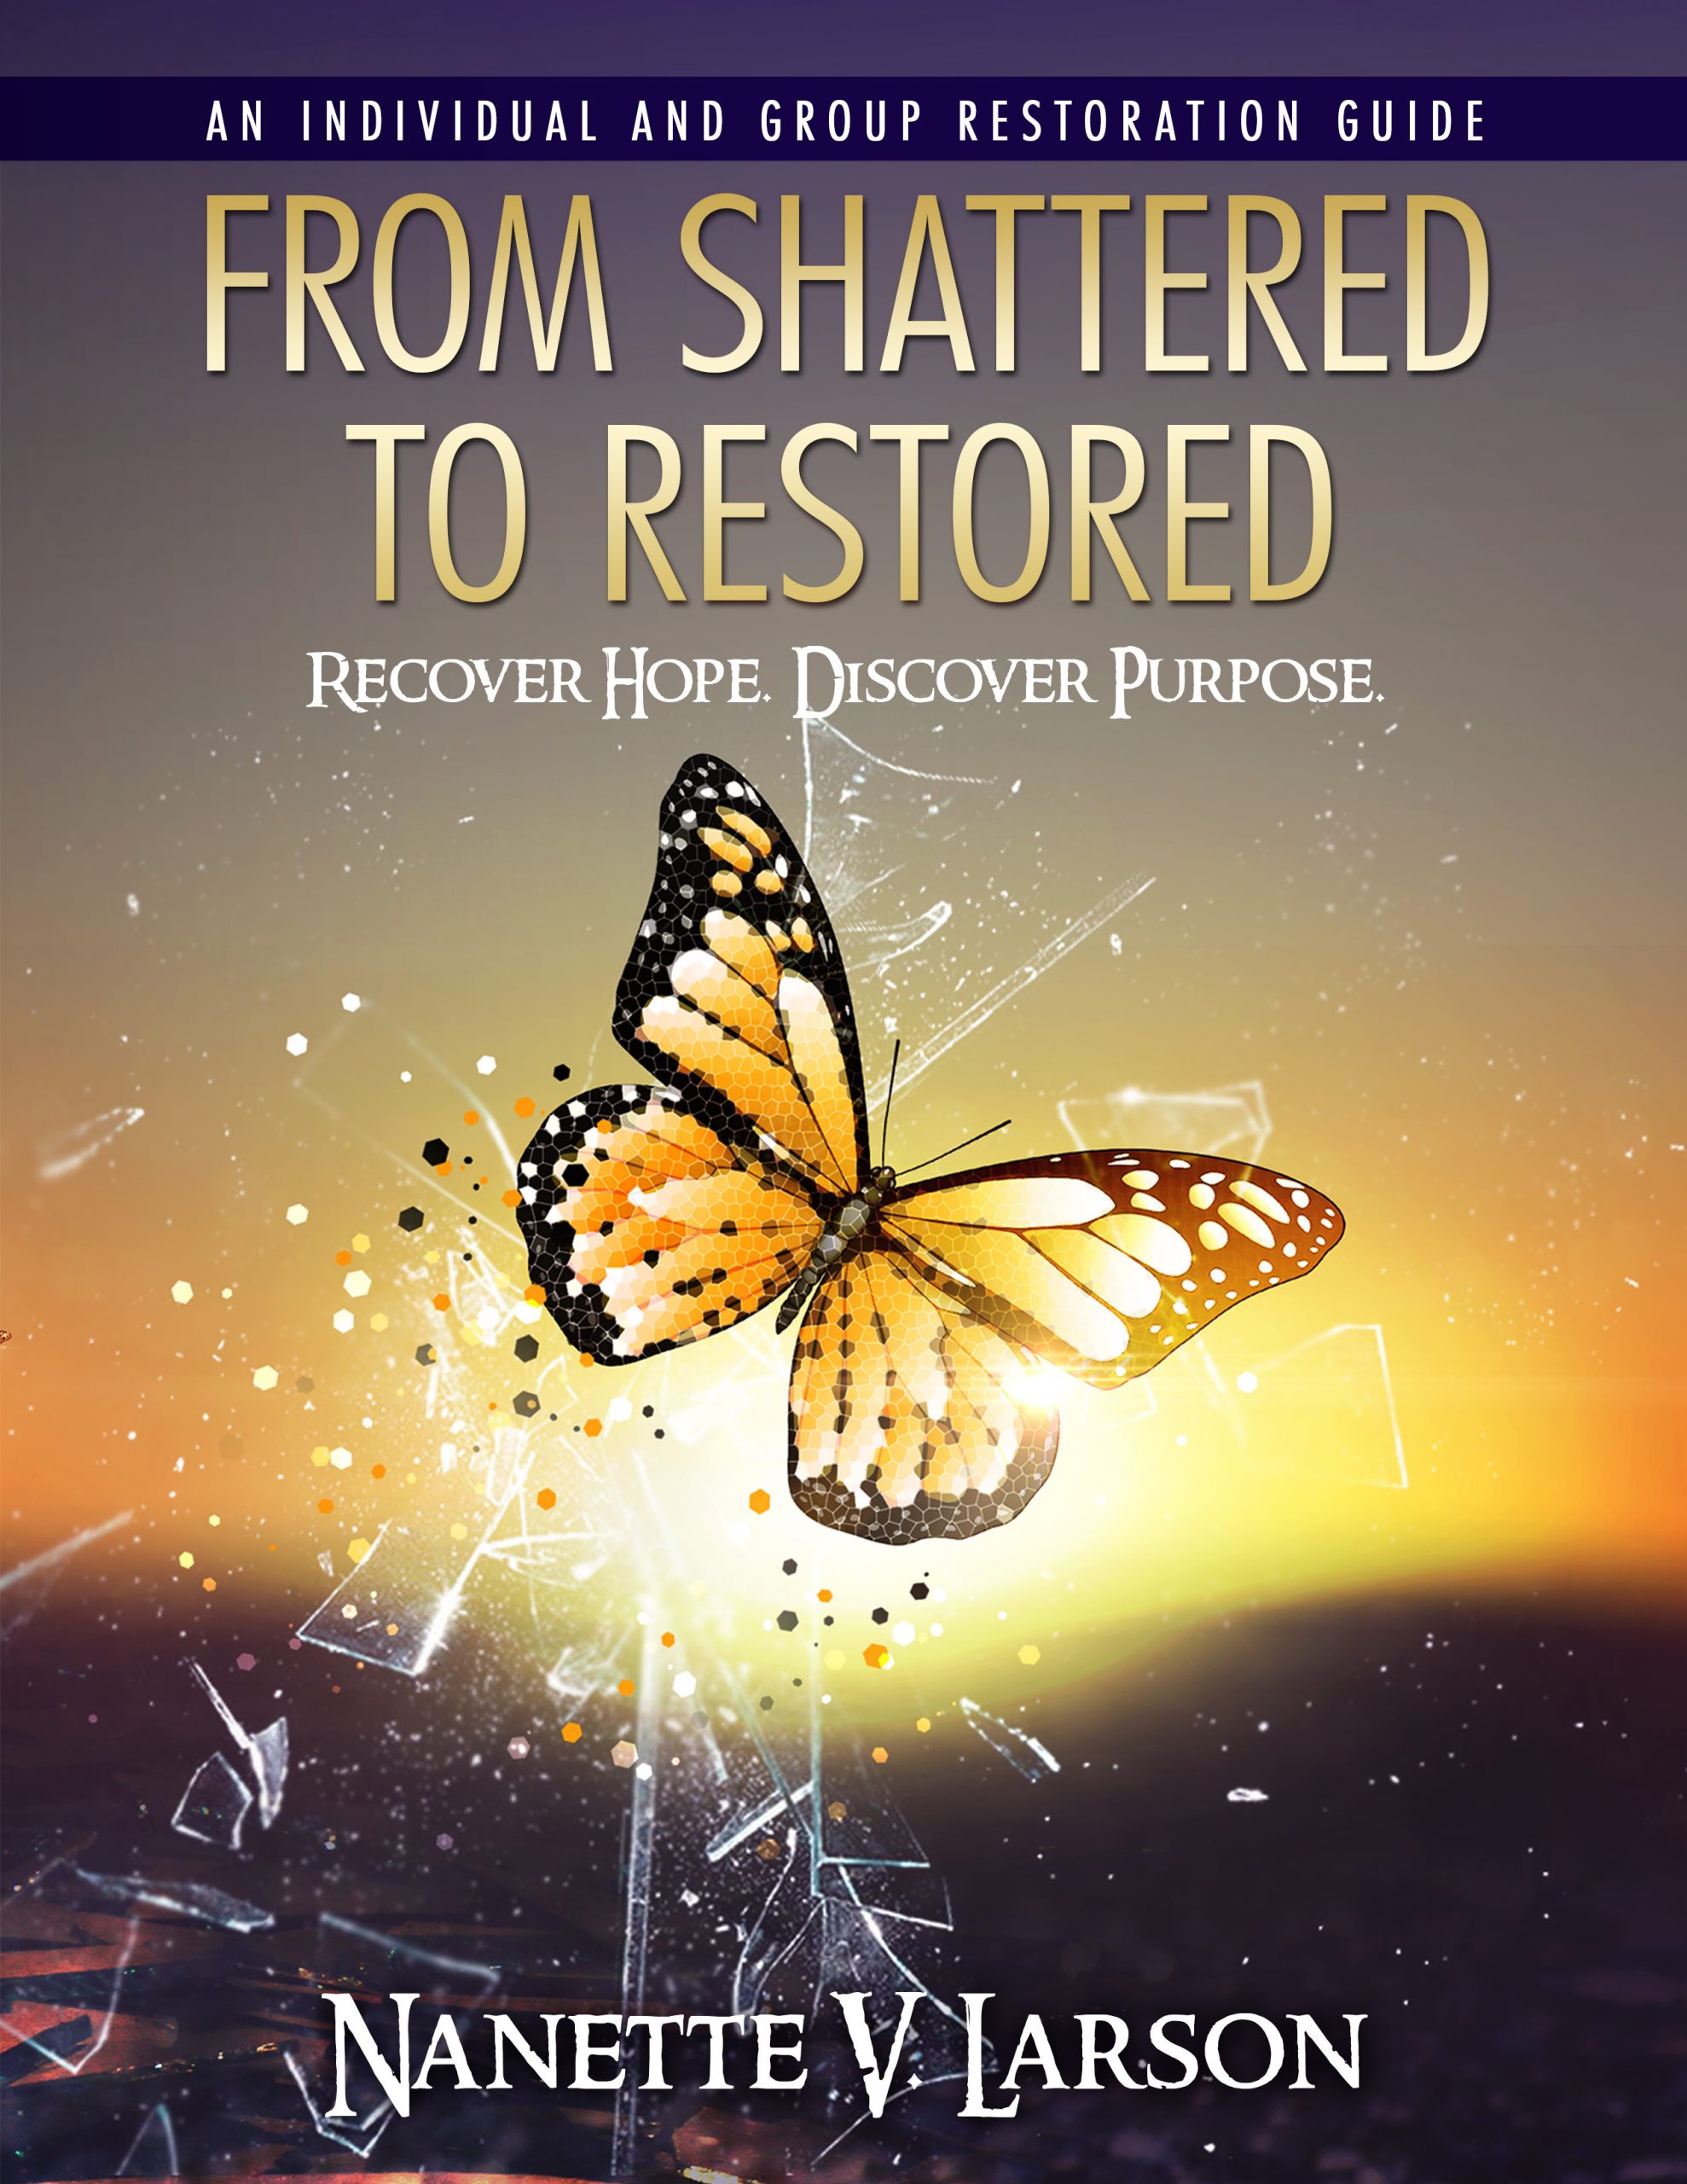 FromShattered_frontCover85x11